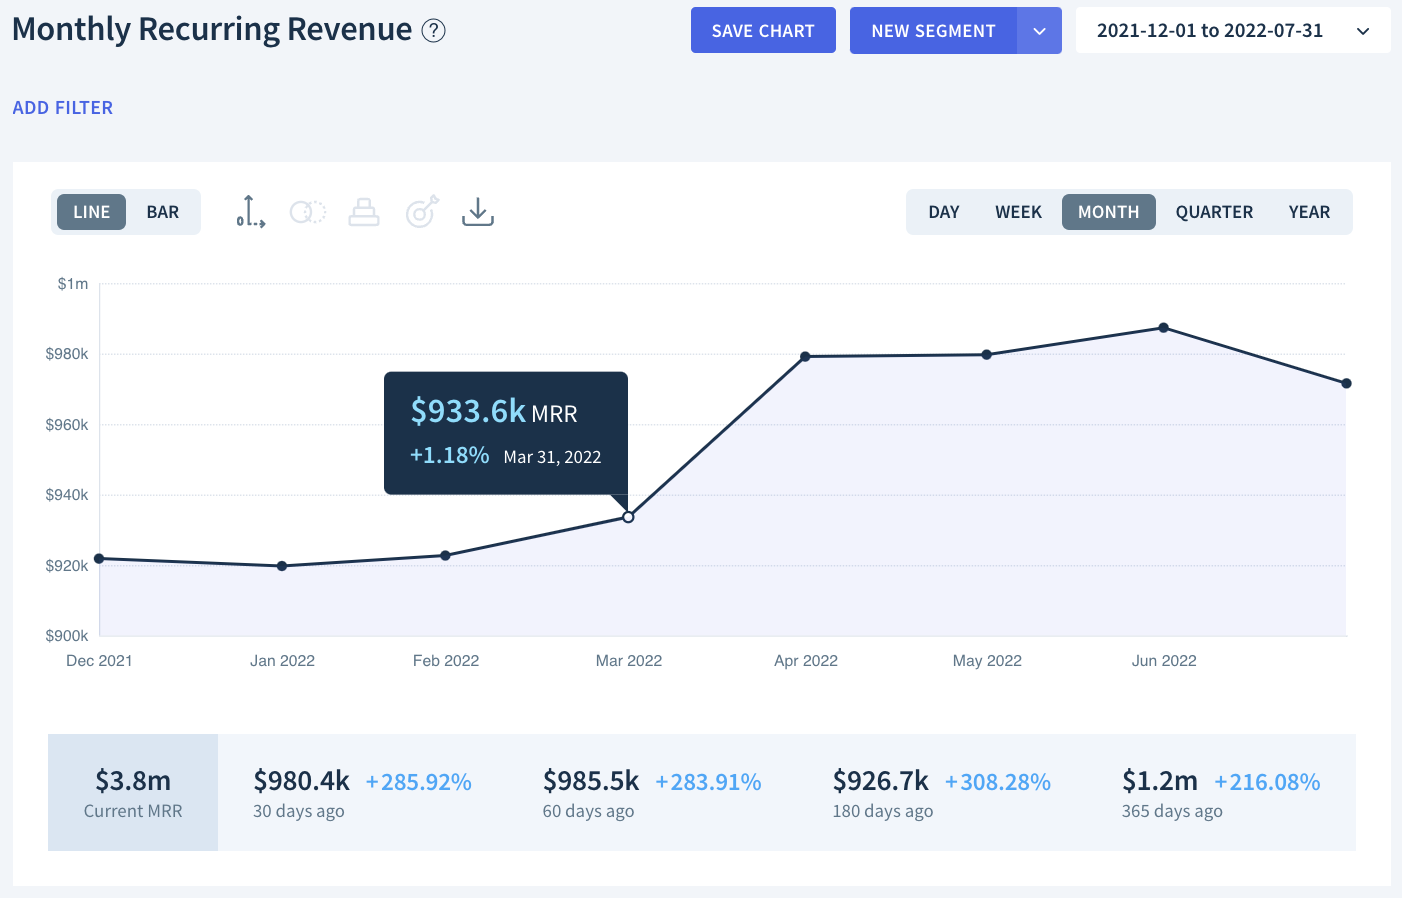 Monthly Recurring Revenue chart